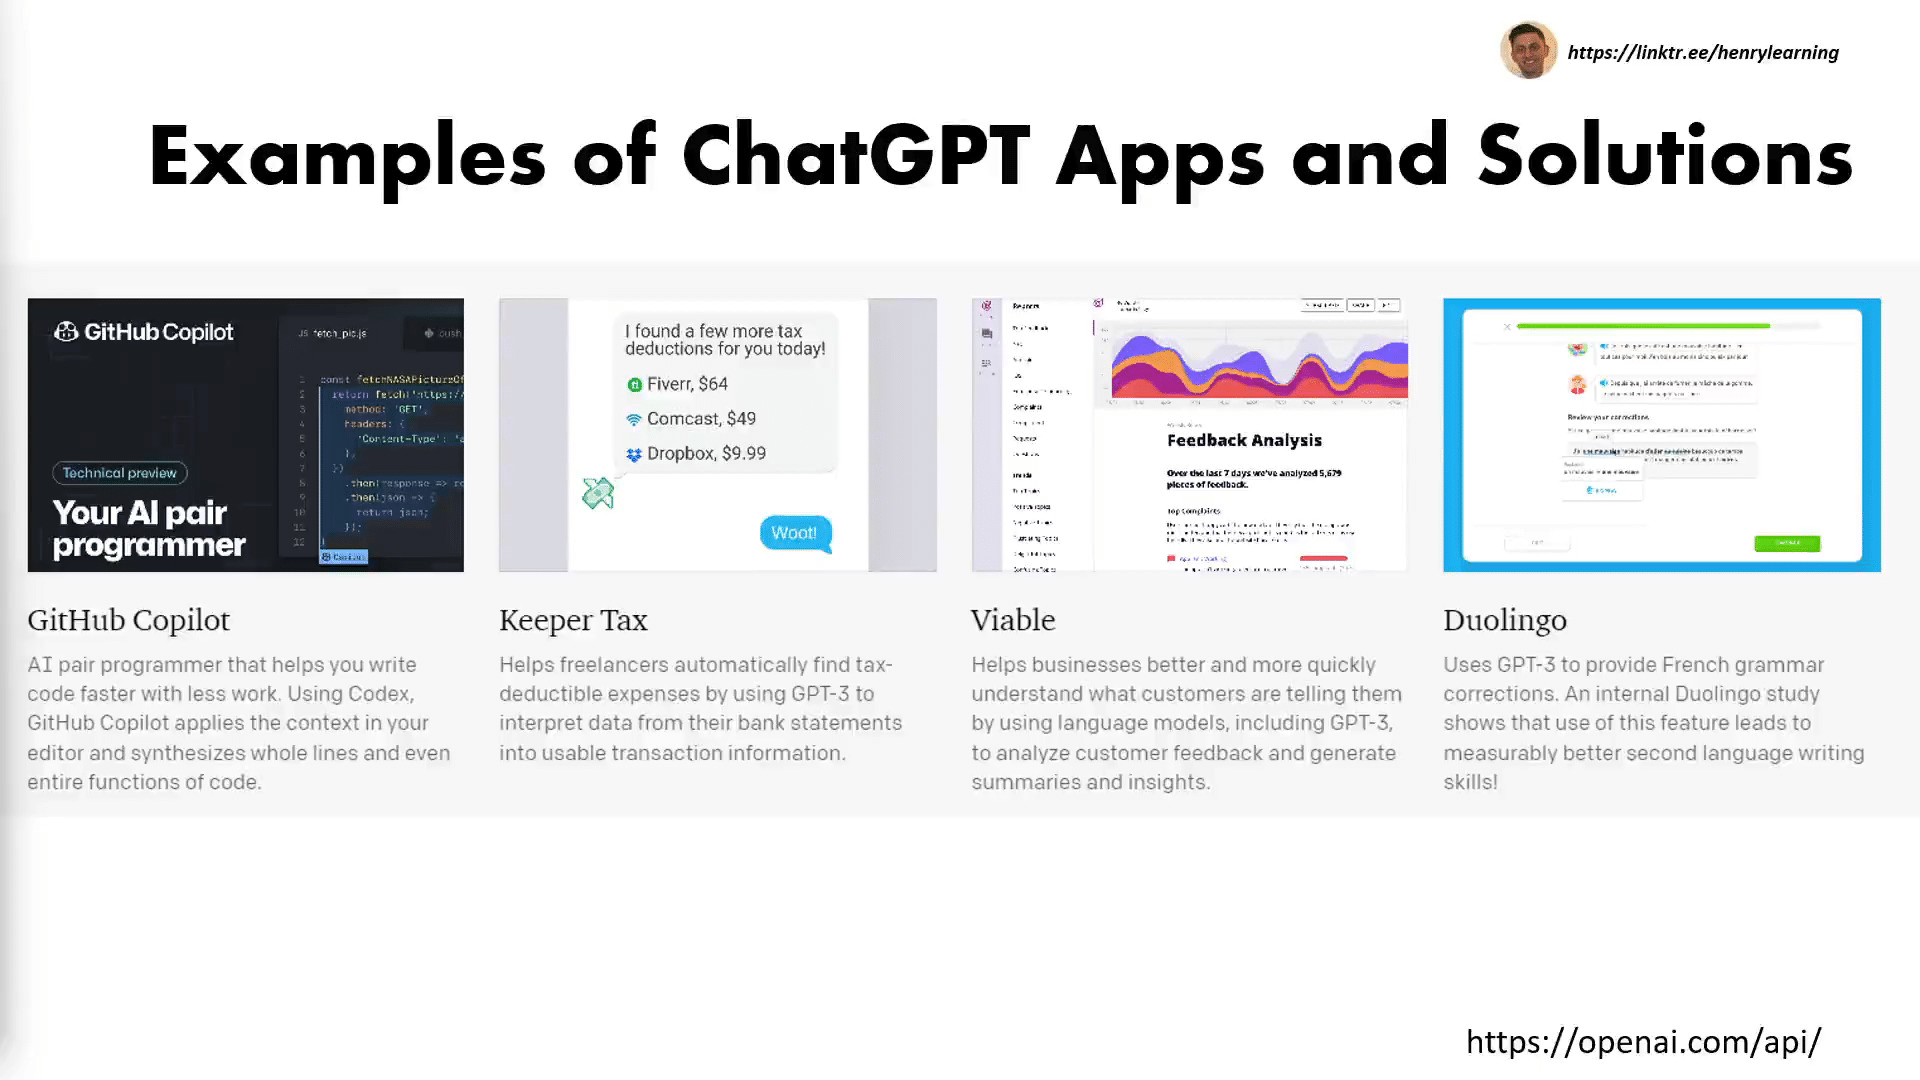 GitHub Copilot, Duolingo, Keeper Tax, and Viable are just some examples of apps using  GPT-4